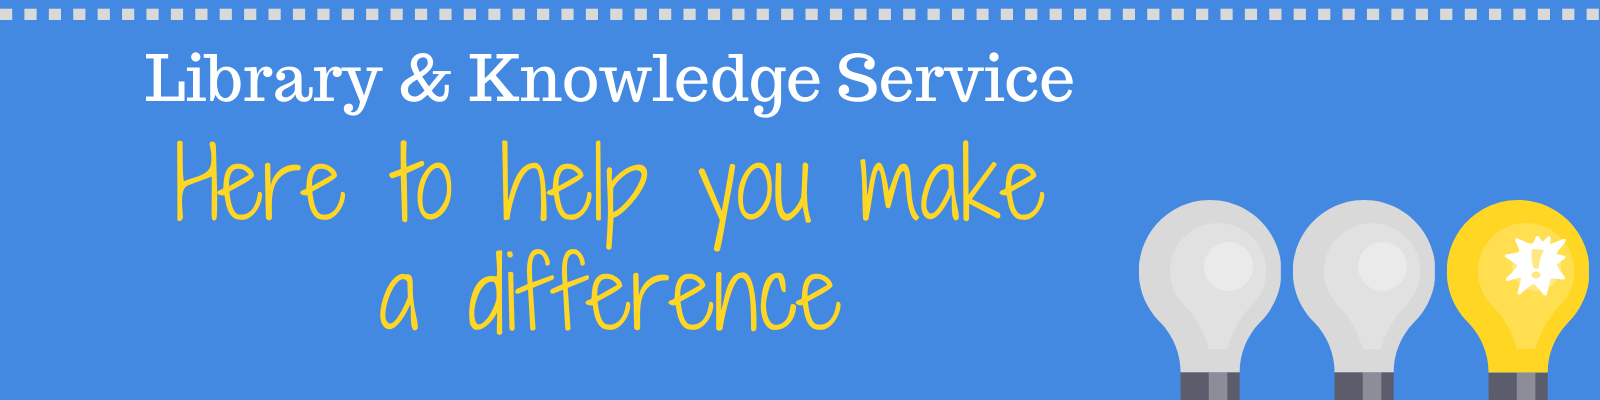 Library and Knowledge Service: Here to help you make a difference.